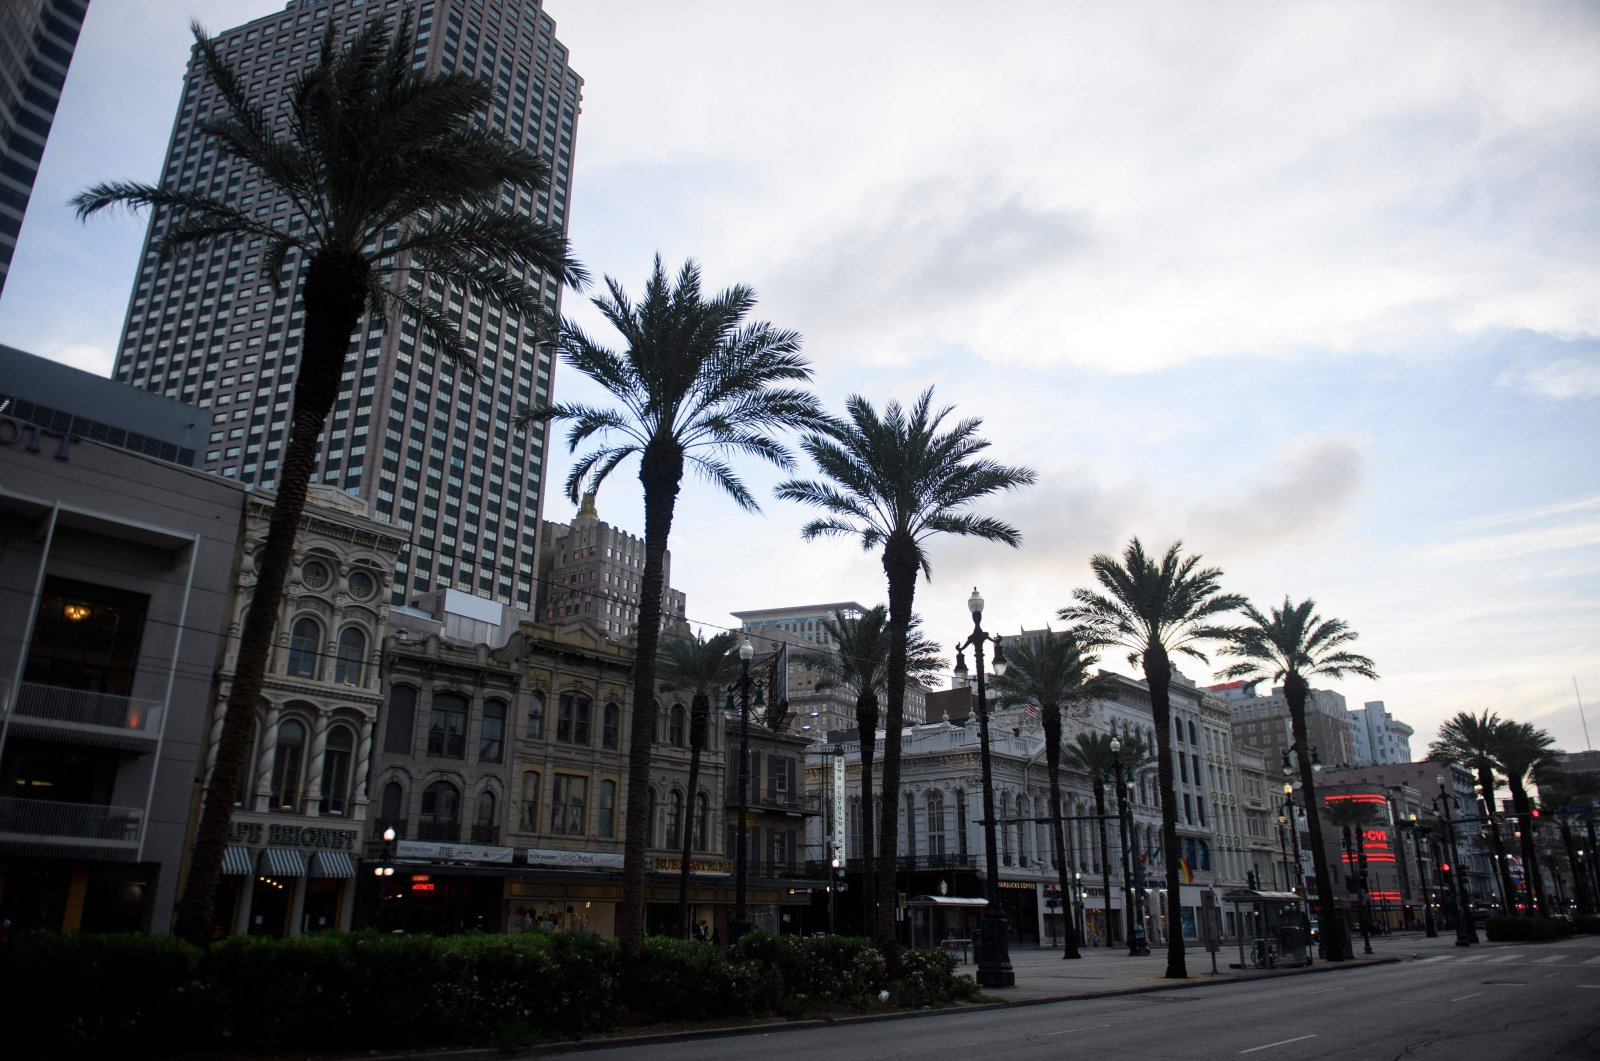 Palm trees stand along Canal Street in New Orleans, Louisiana on August 28, 2021 before the arrival of Hurricane Ida. (AFP Photo)